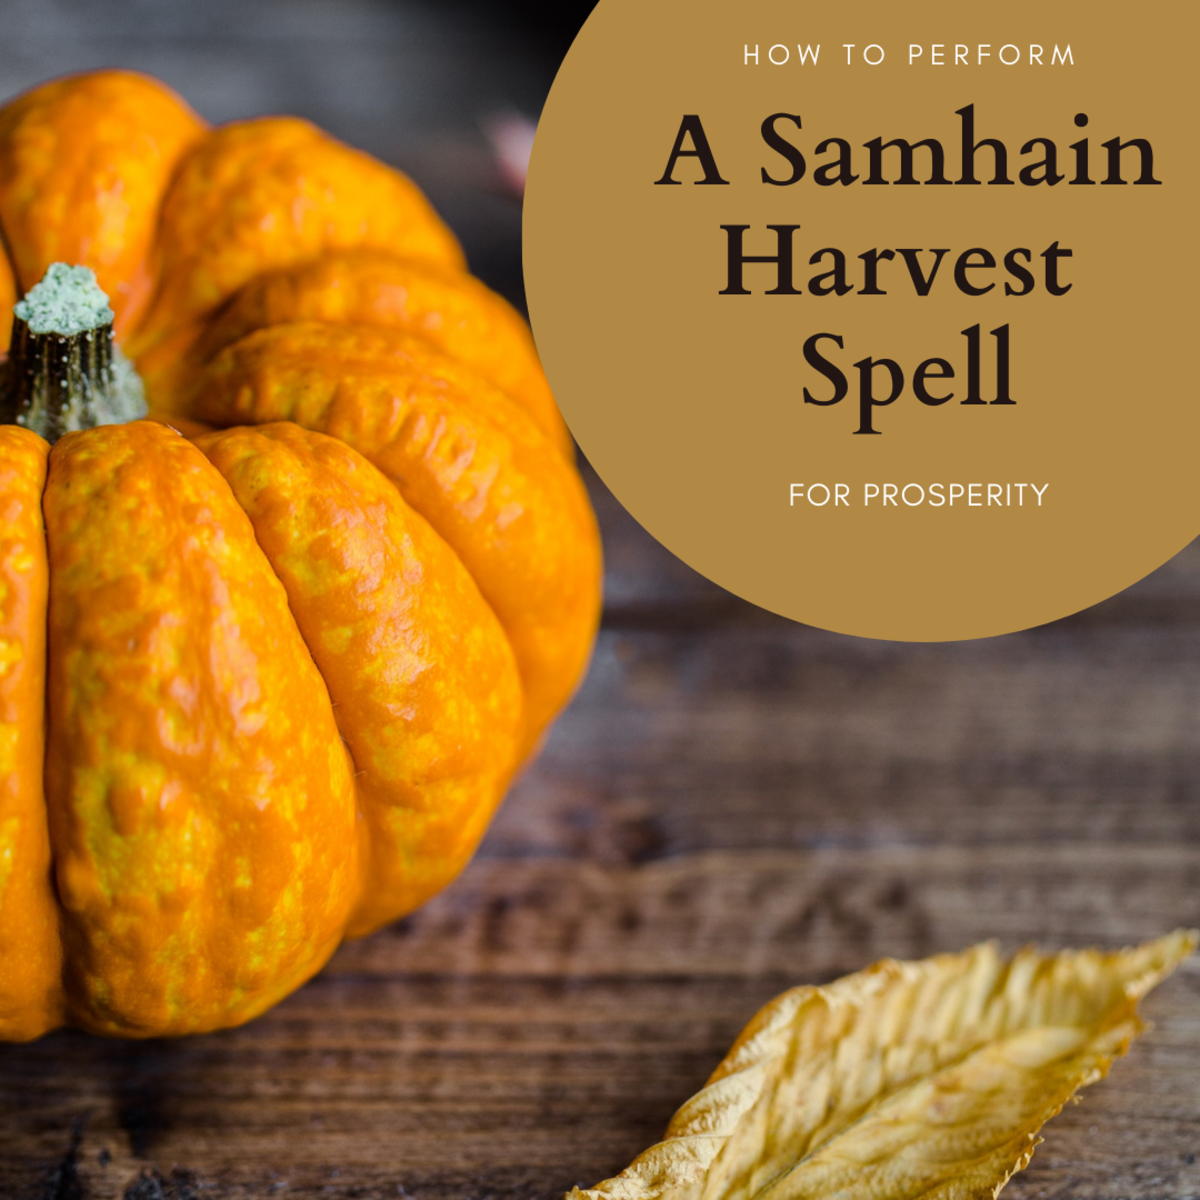 Samhain is an excellent time to invite abundance and prosperity into the new year